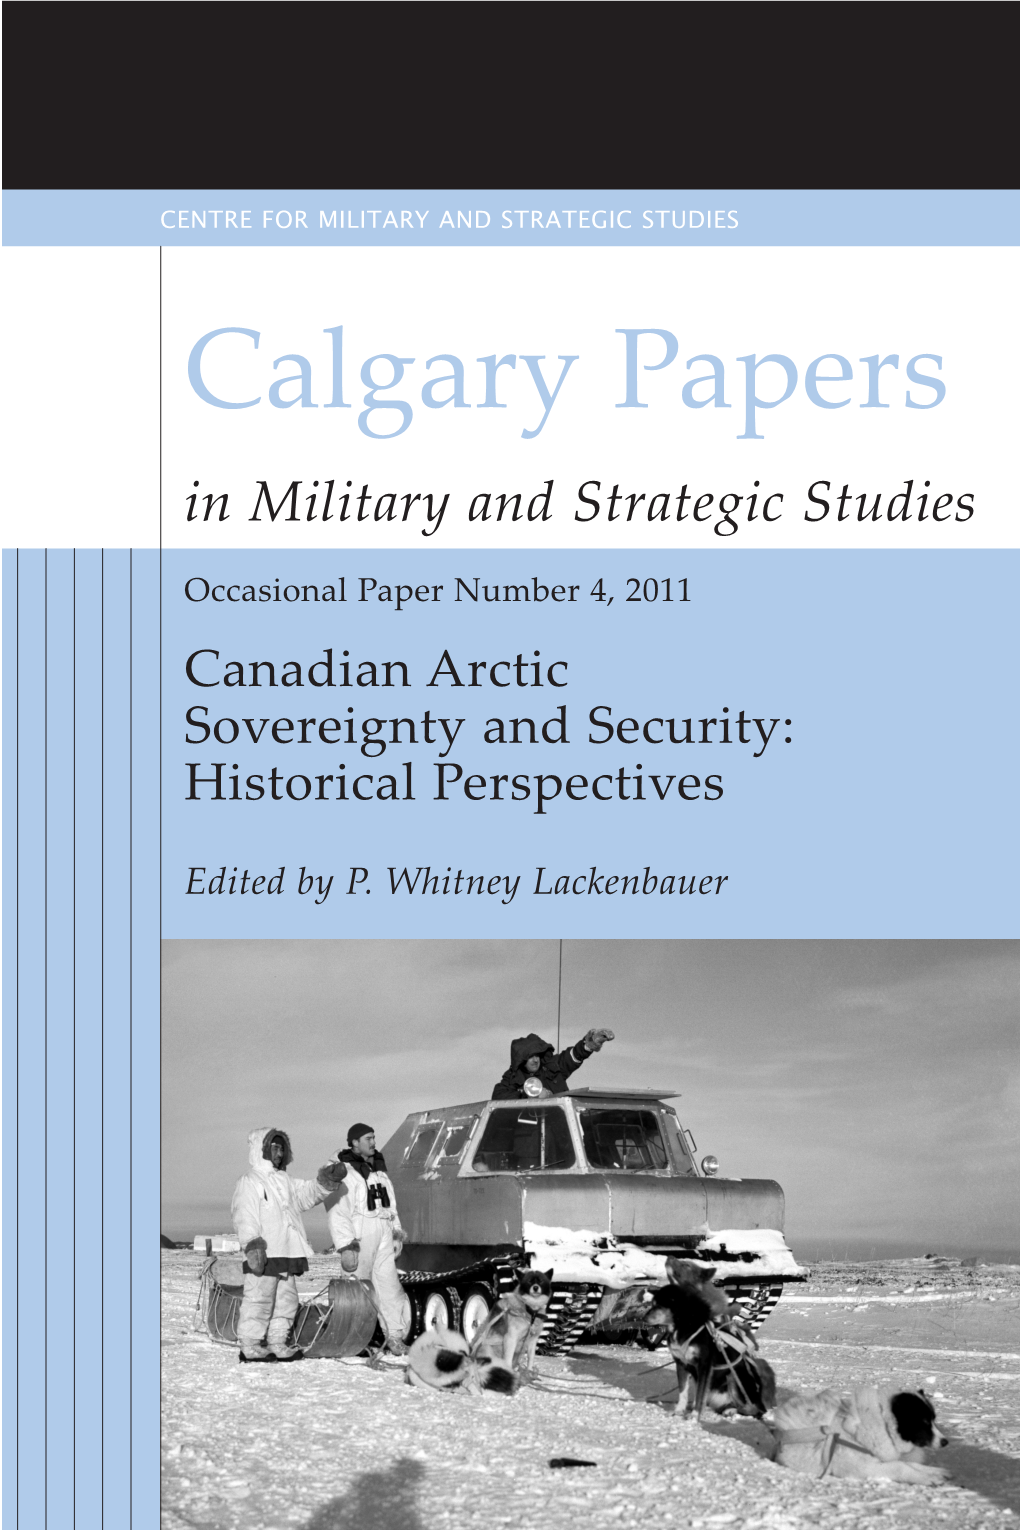 Calgary Papers in Military and Strategic Studies